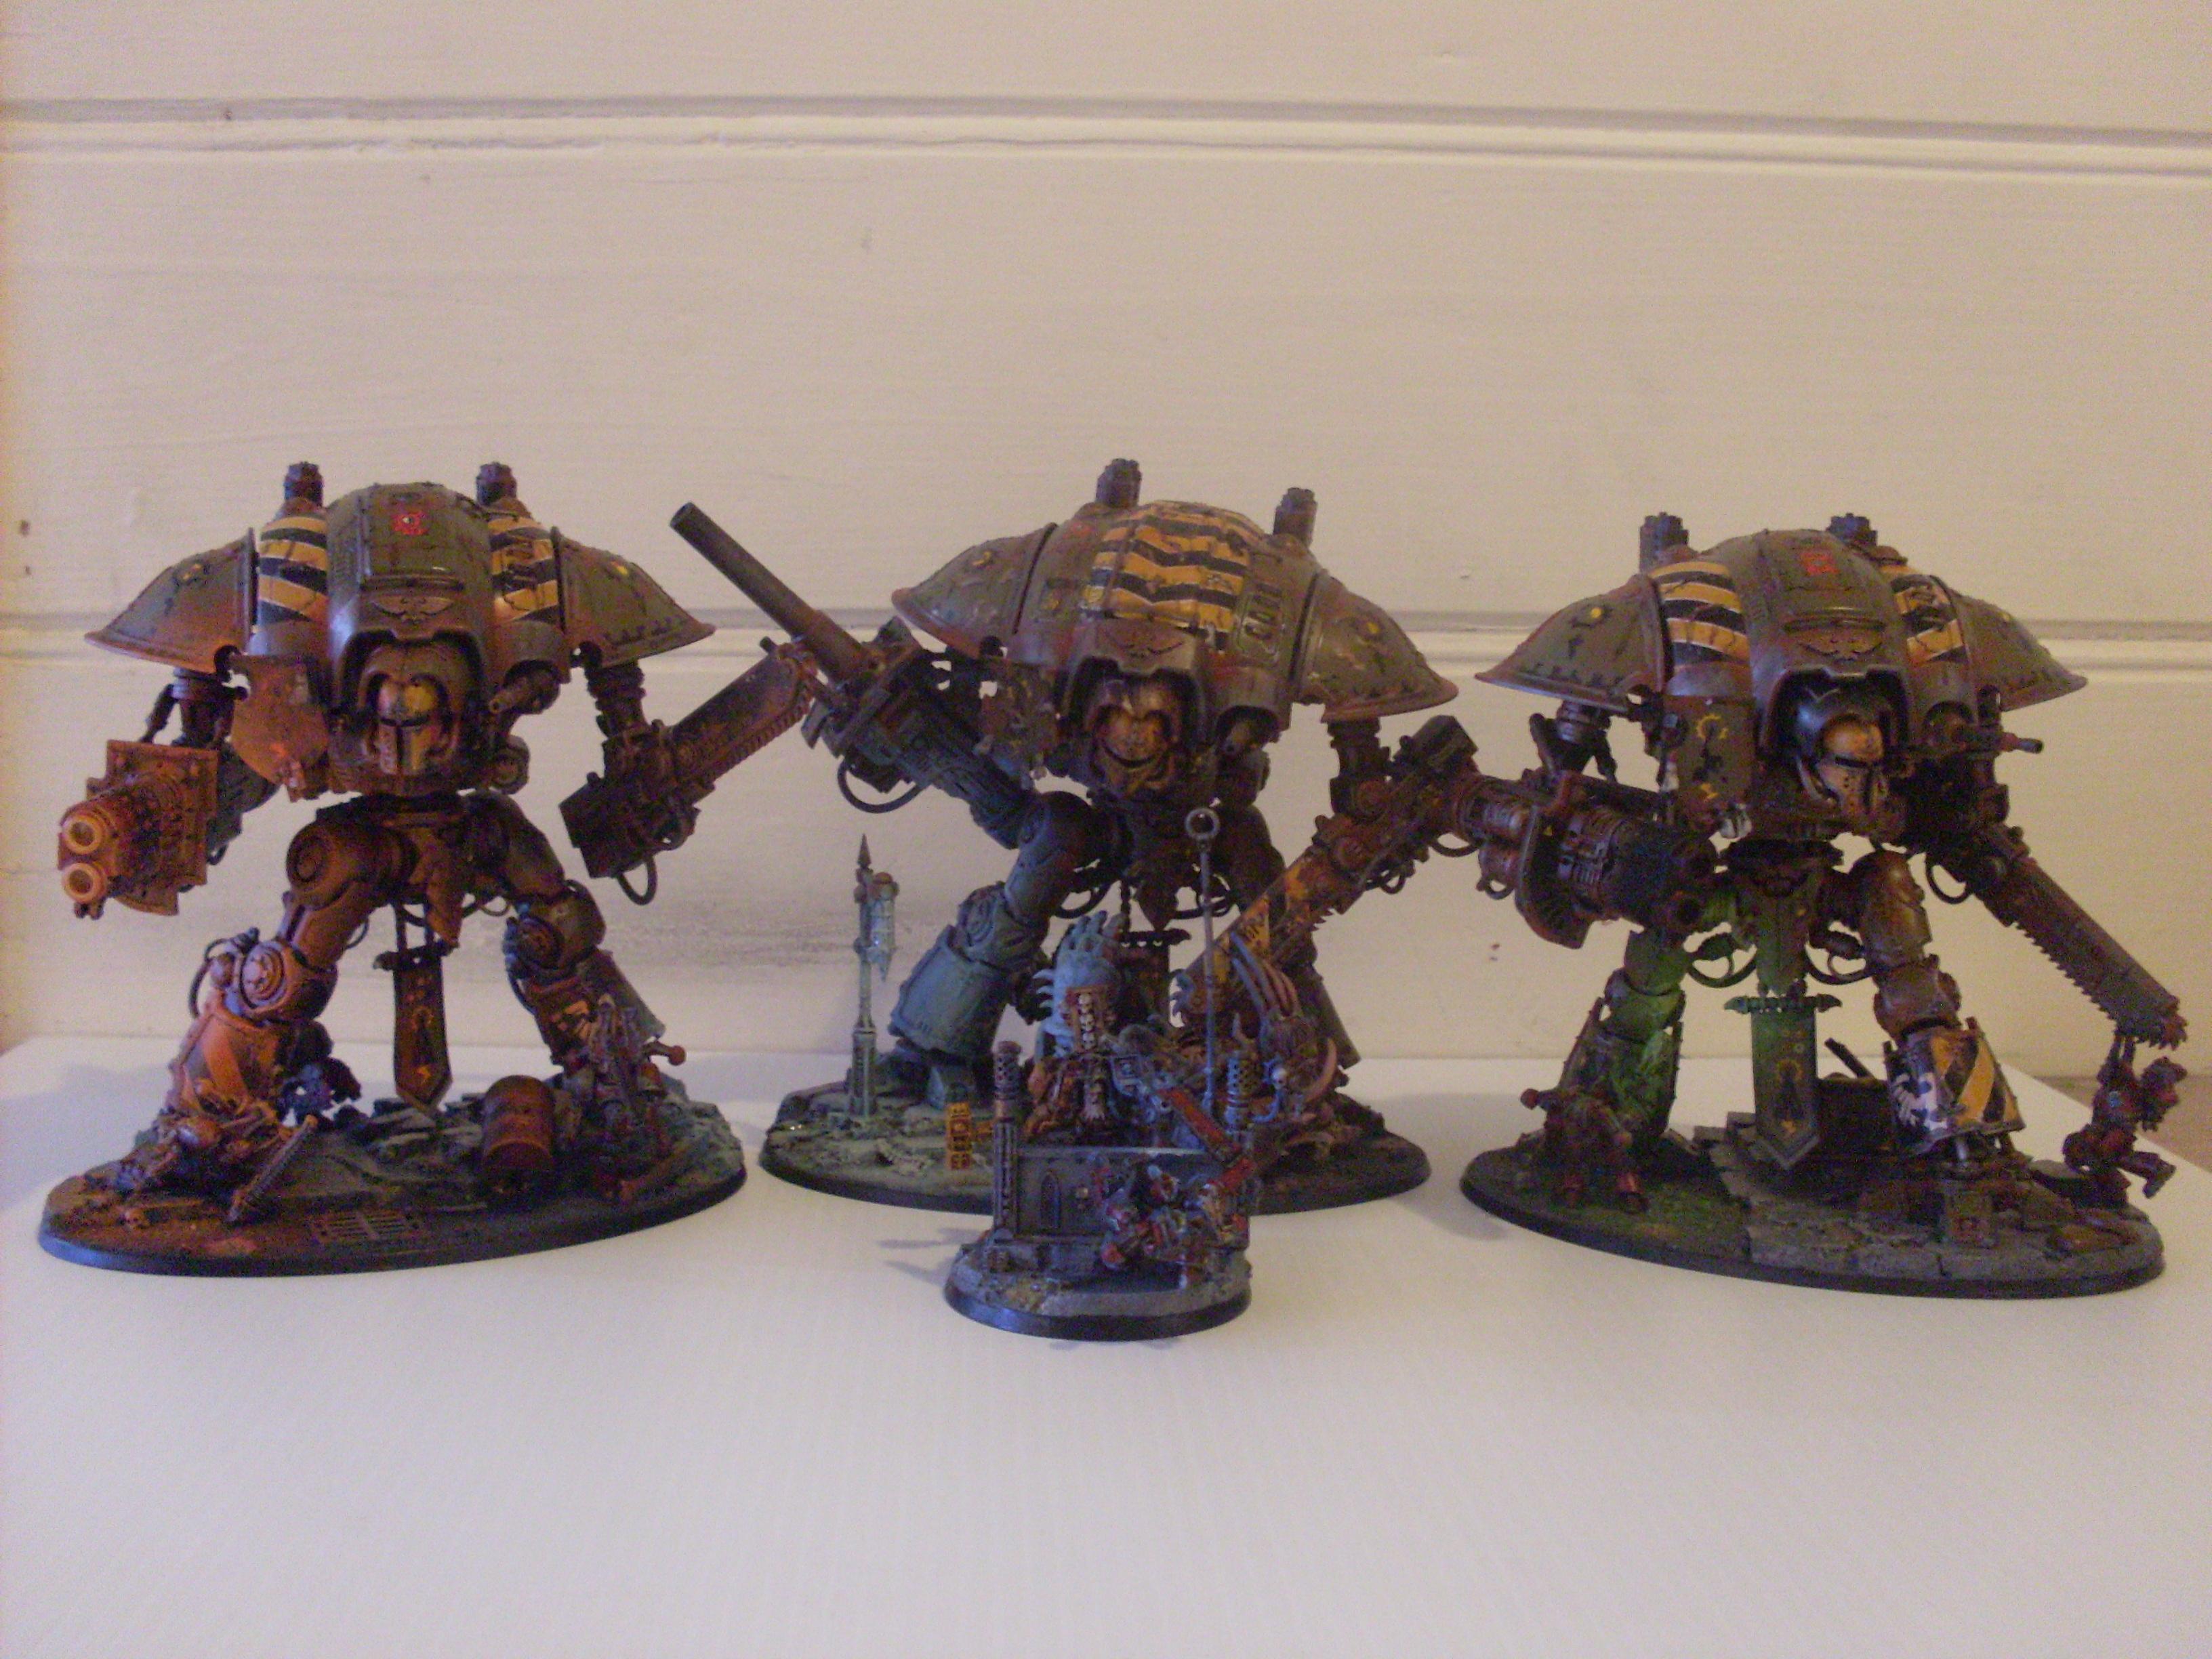 Army, Berserkers, Chaos, Combi-melta, Diaorama, Grey Knights, Guard, Hellbrute, Imperial, Imperial Knight, Inquisitor, Khorne, Rust Effect, Source Lighting, Space Marines, Stripes, Super-heavy, Terminator Armor, Titan, Vehicle, Walker, Weathered, World Eaters